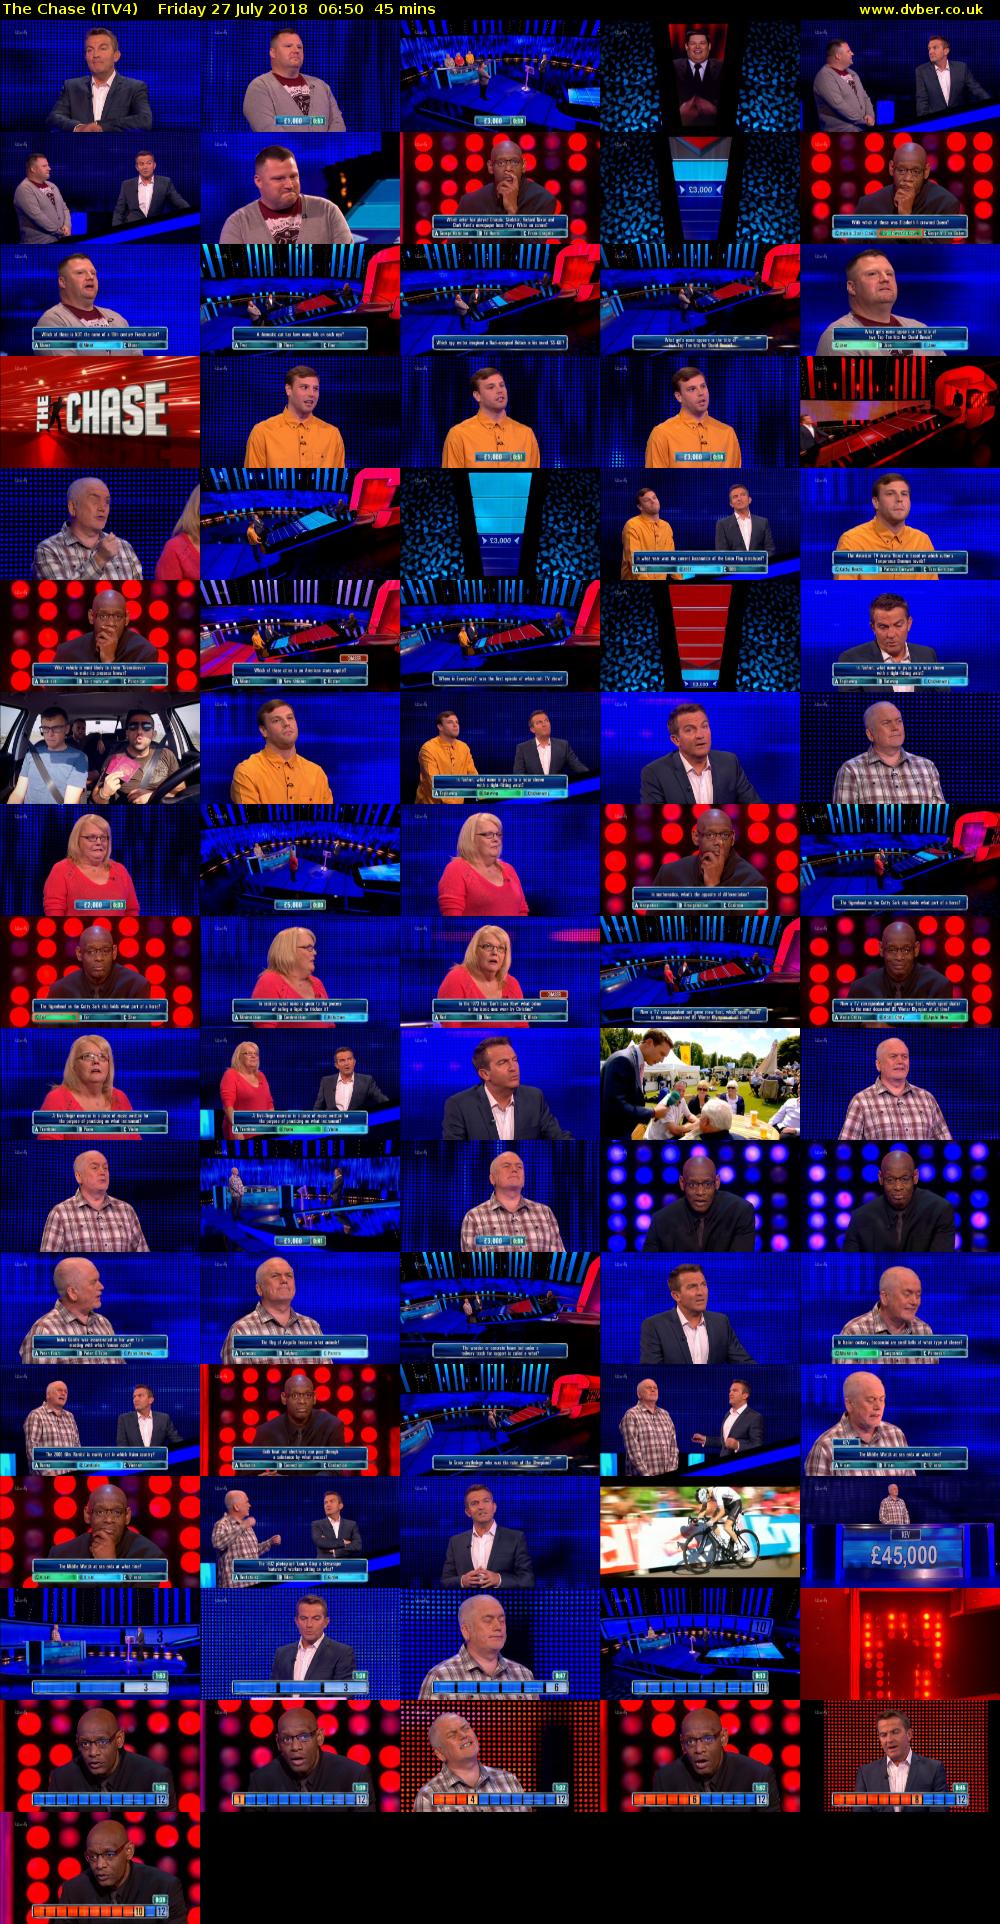 The Chase (ITV4) Friday 27 July 2018 06:50 - 07:35